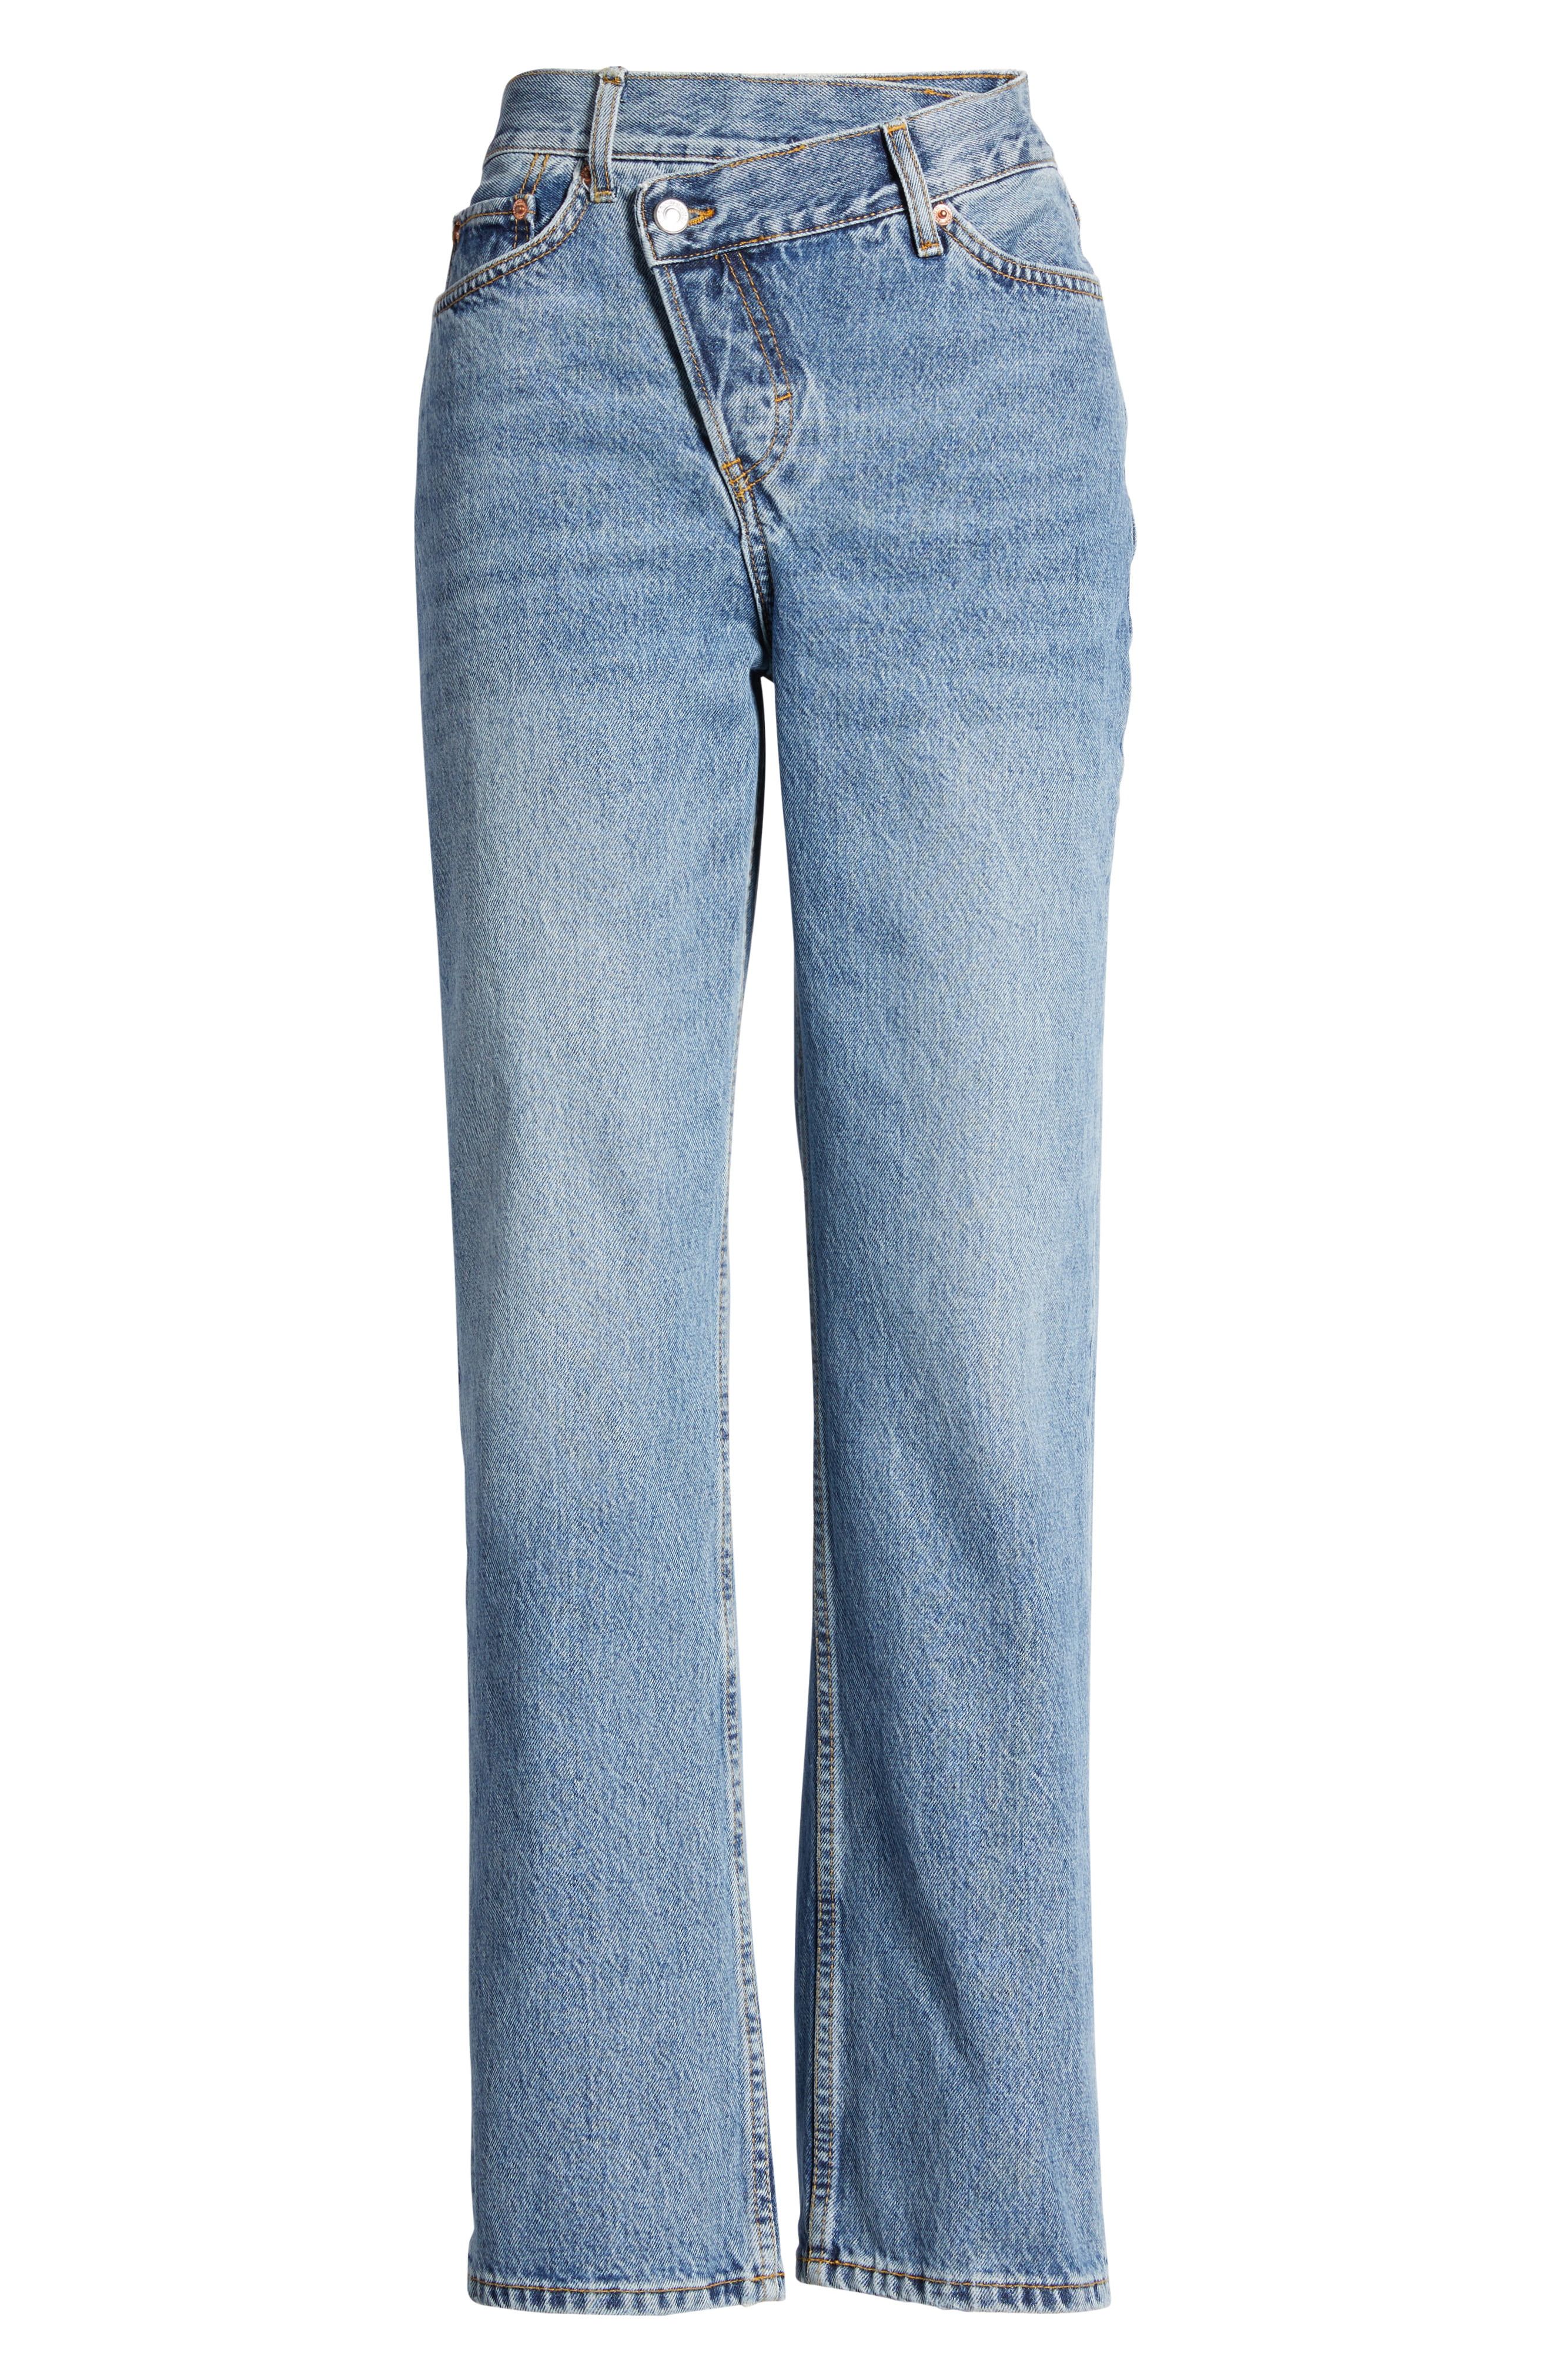 best high waisted jeans 2019